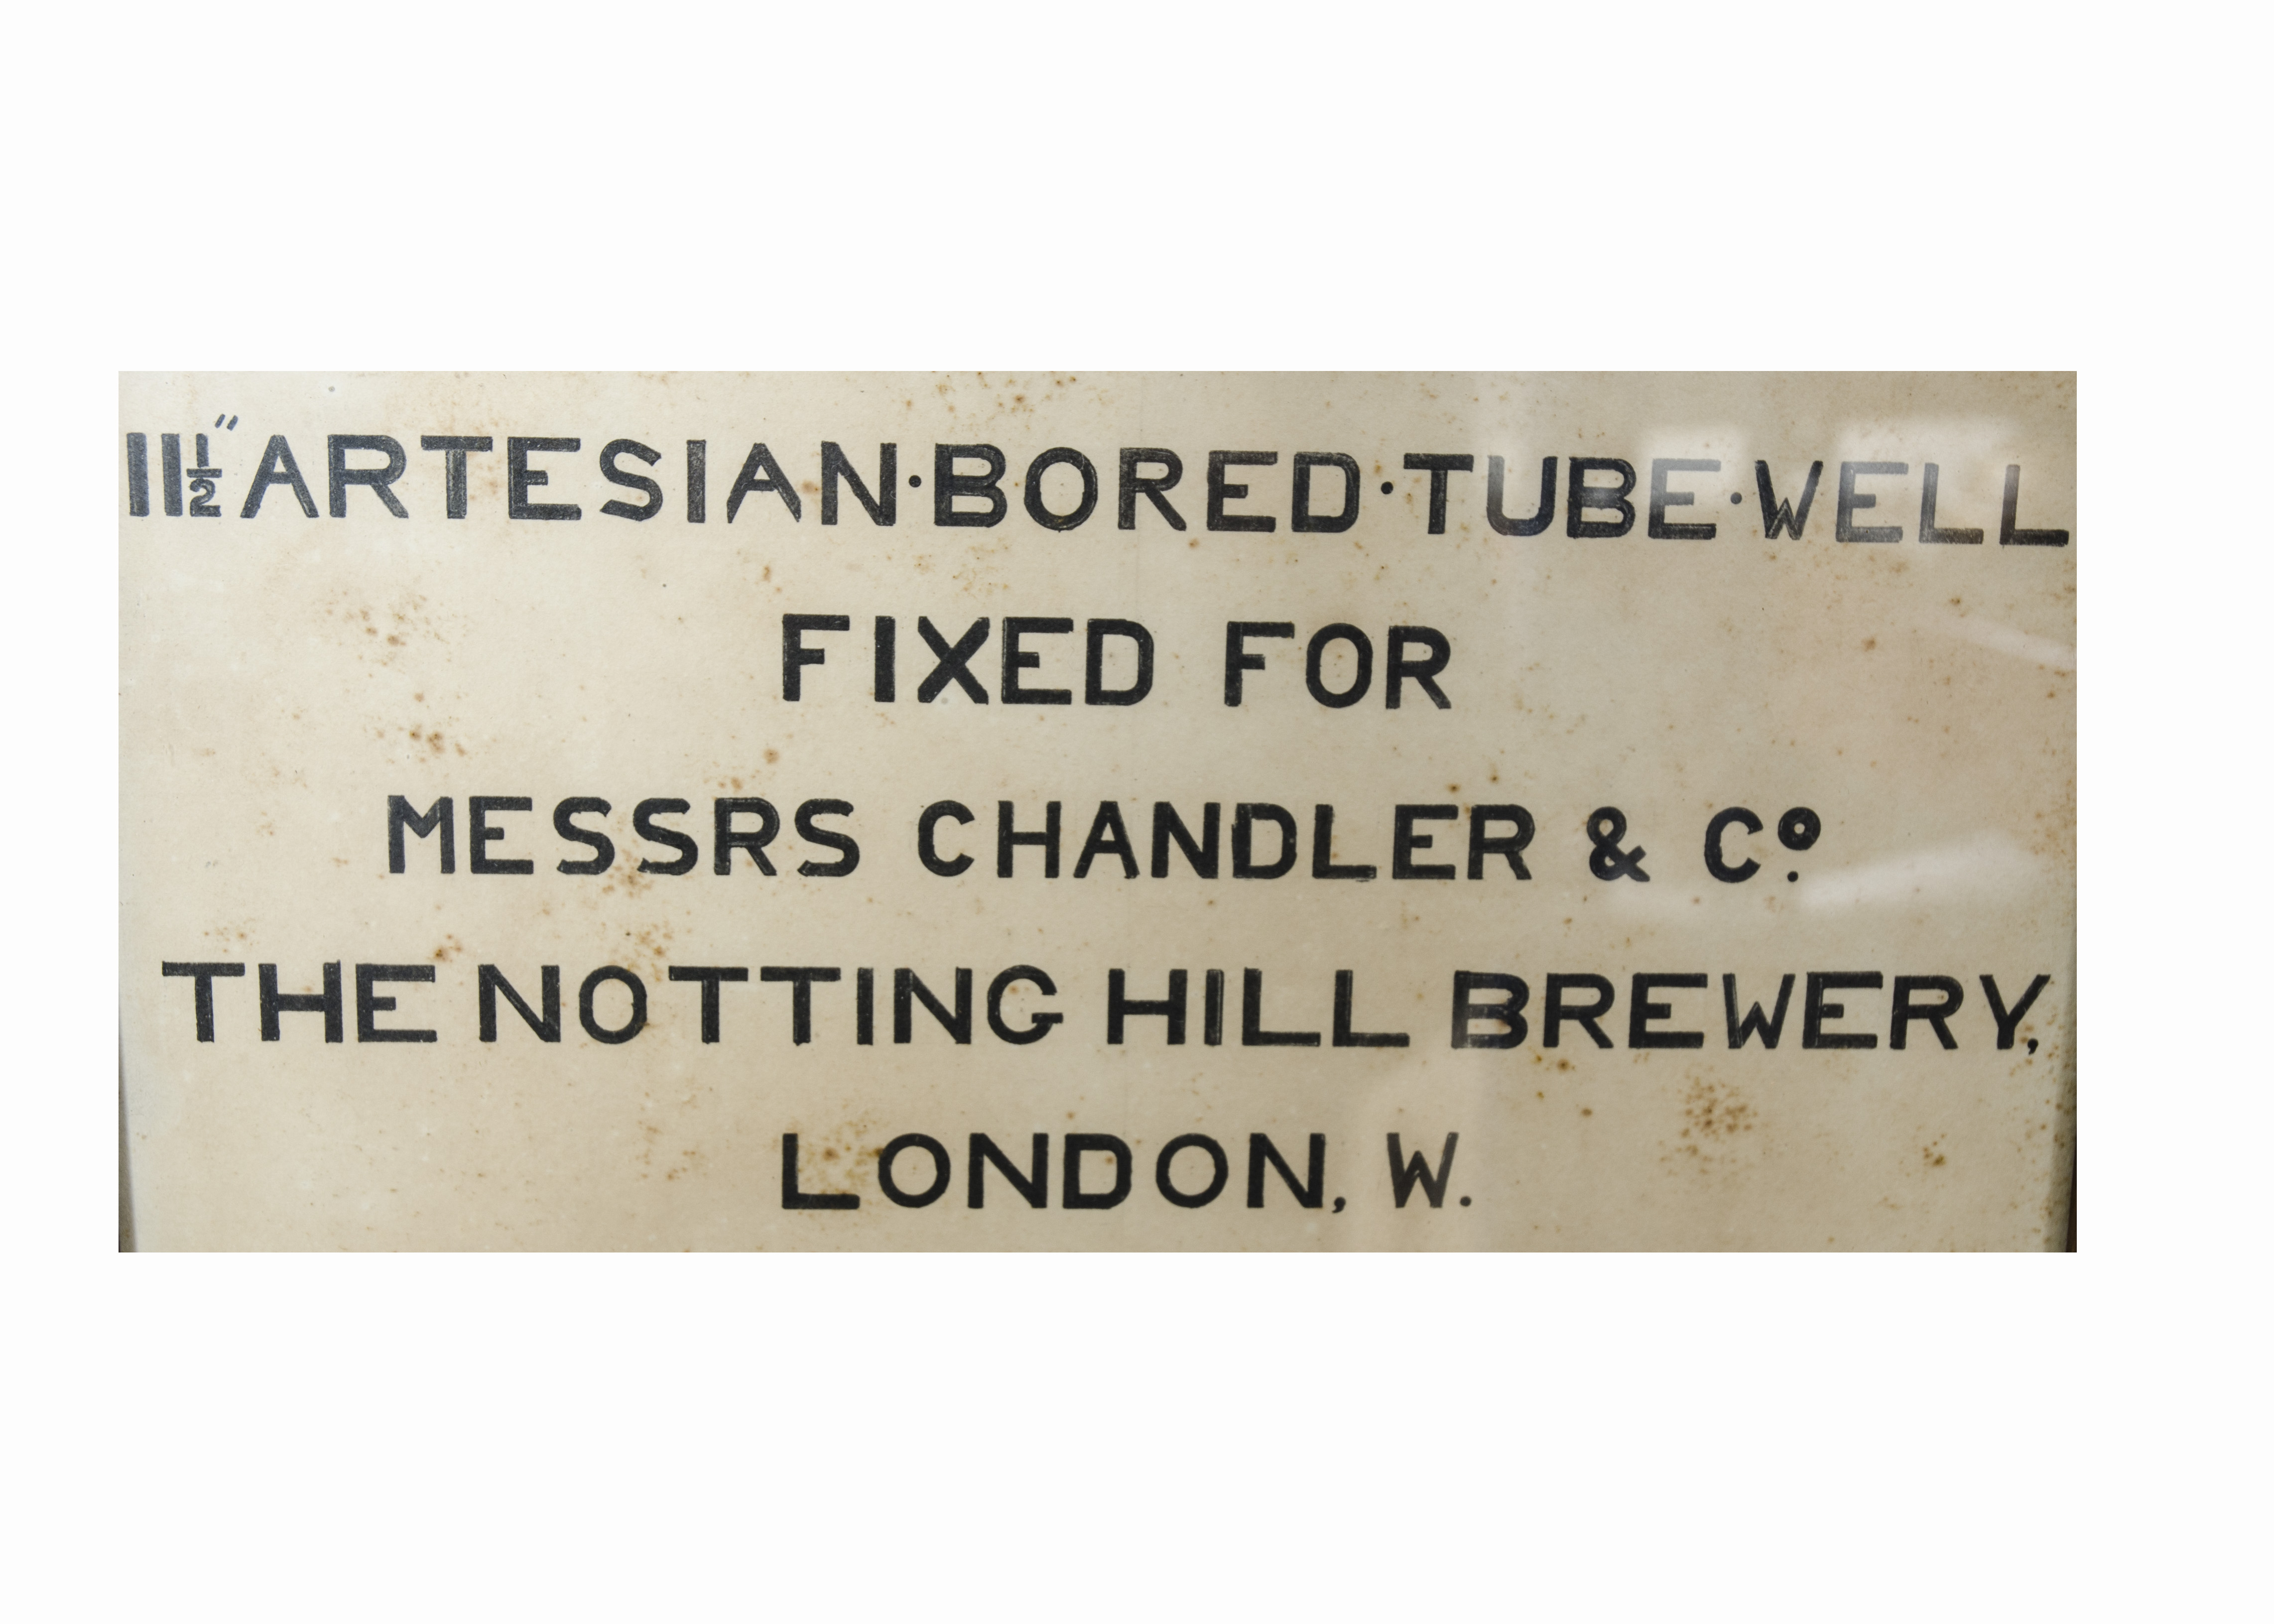 A framed artesian bored tube well by C. Isler & Co, 'fixed for Messrs Chandler & Co', displaying a